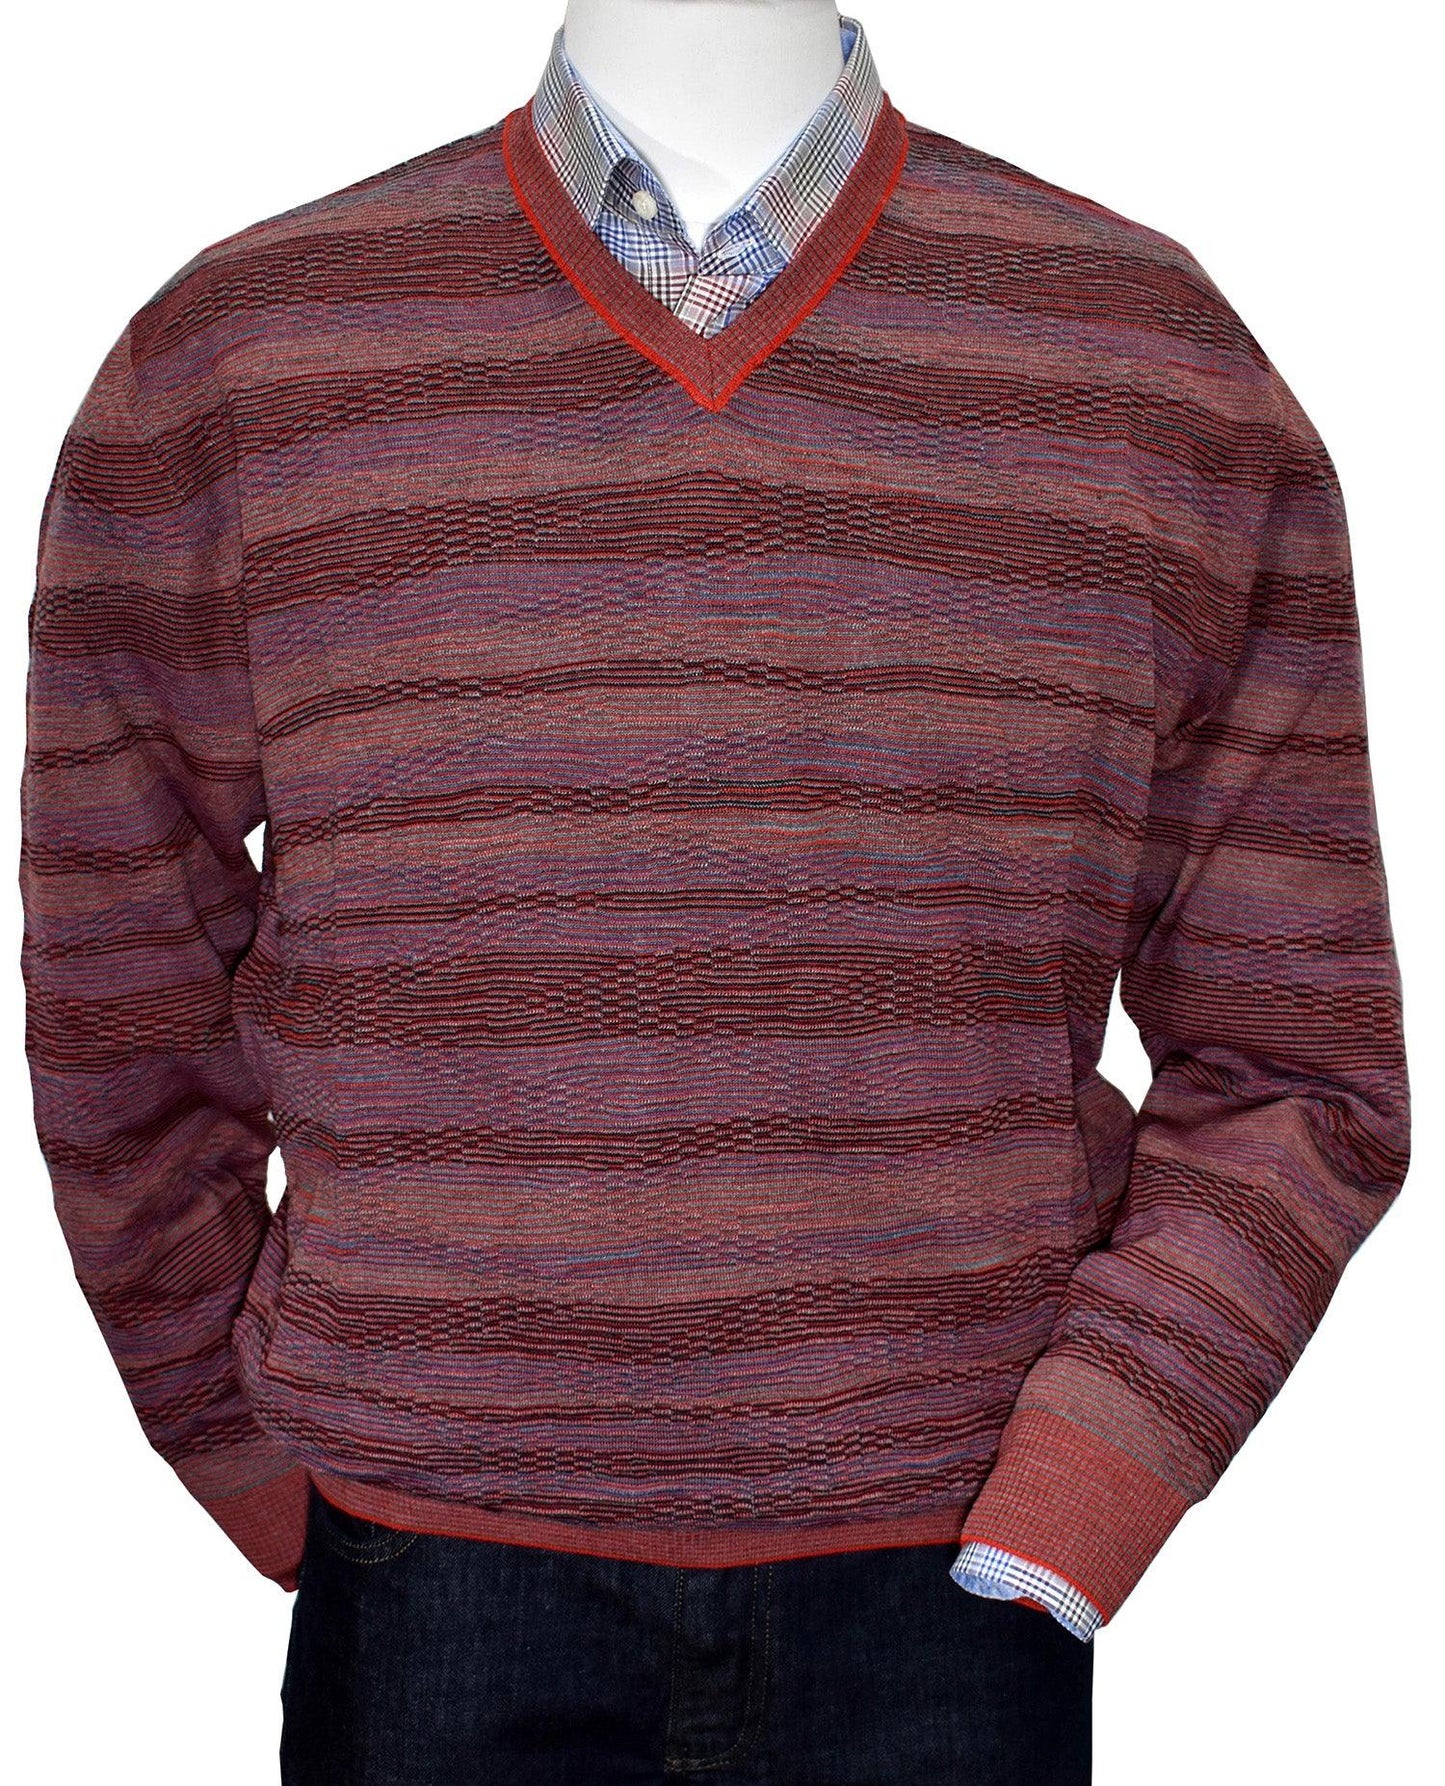 Bari Wave V neck Men's Sweater  Excellent combination of red and subtle navy tones, finely knitted in an abstract pattern. Banded cuffs and waist. Allover pattern. Light weight, perfect for any occasion. Classic Fit.  Sweater by Marcello Sport.